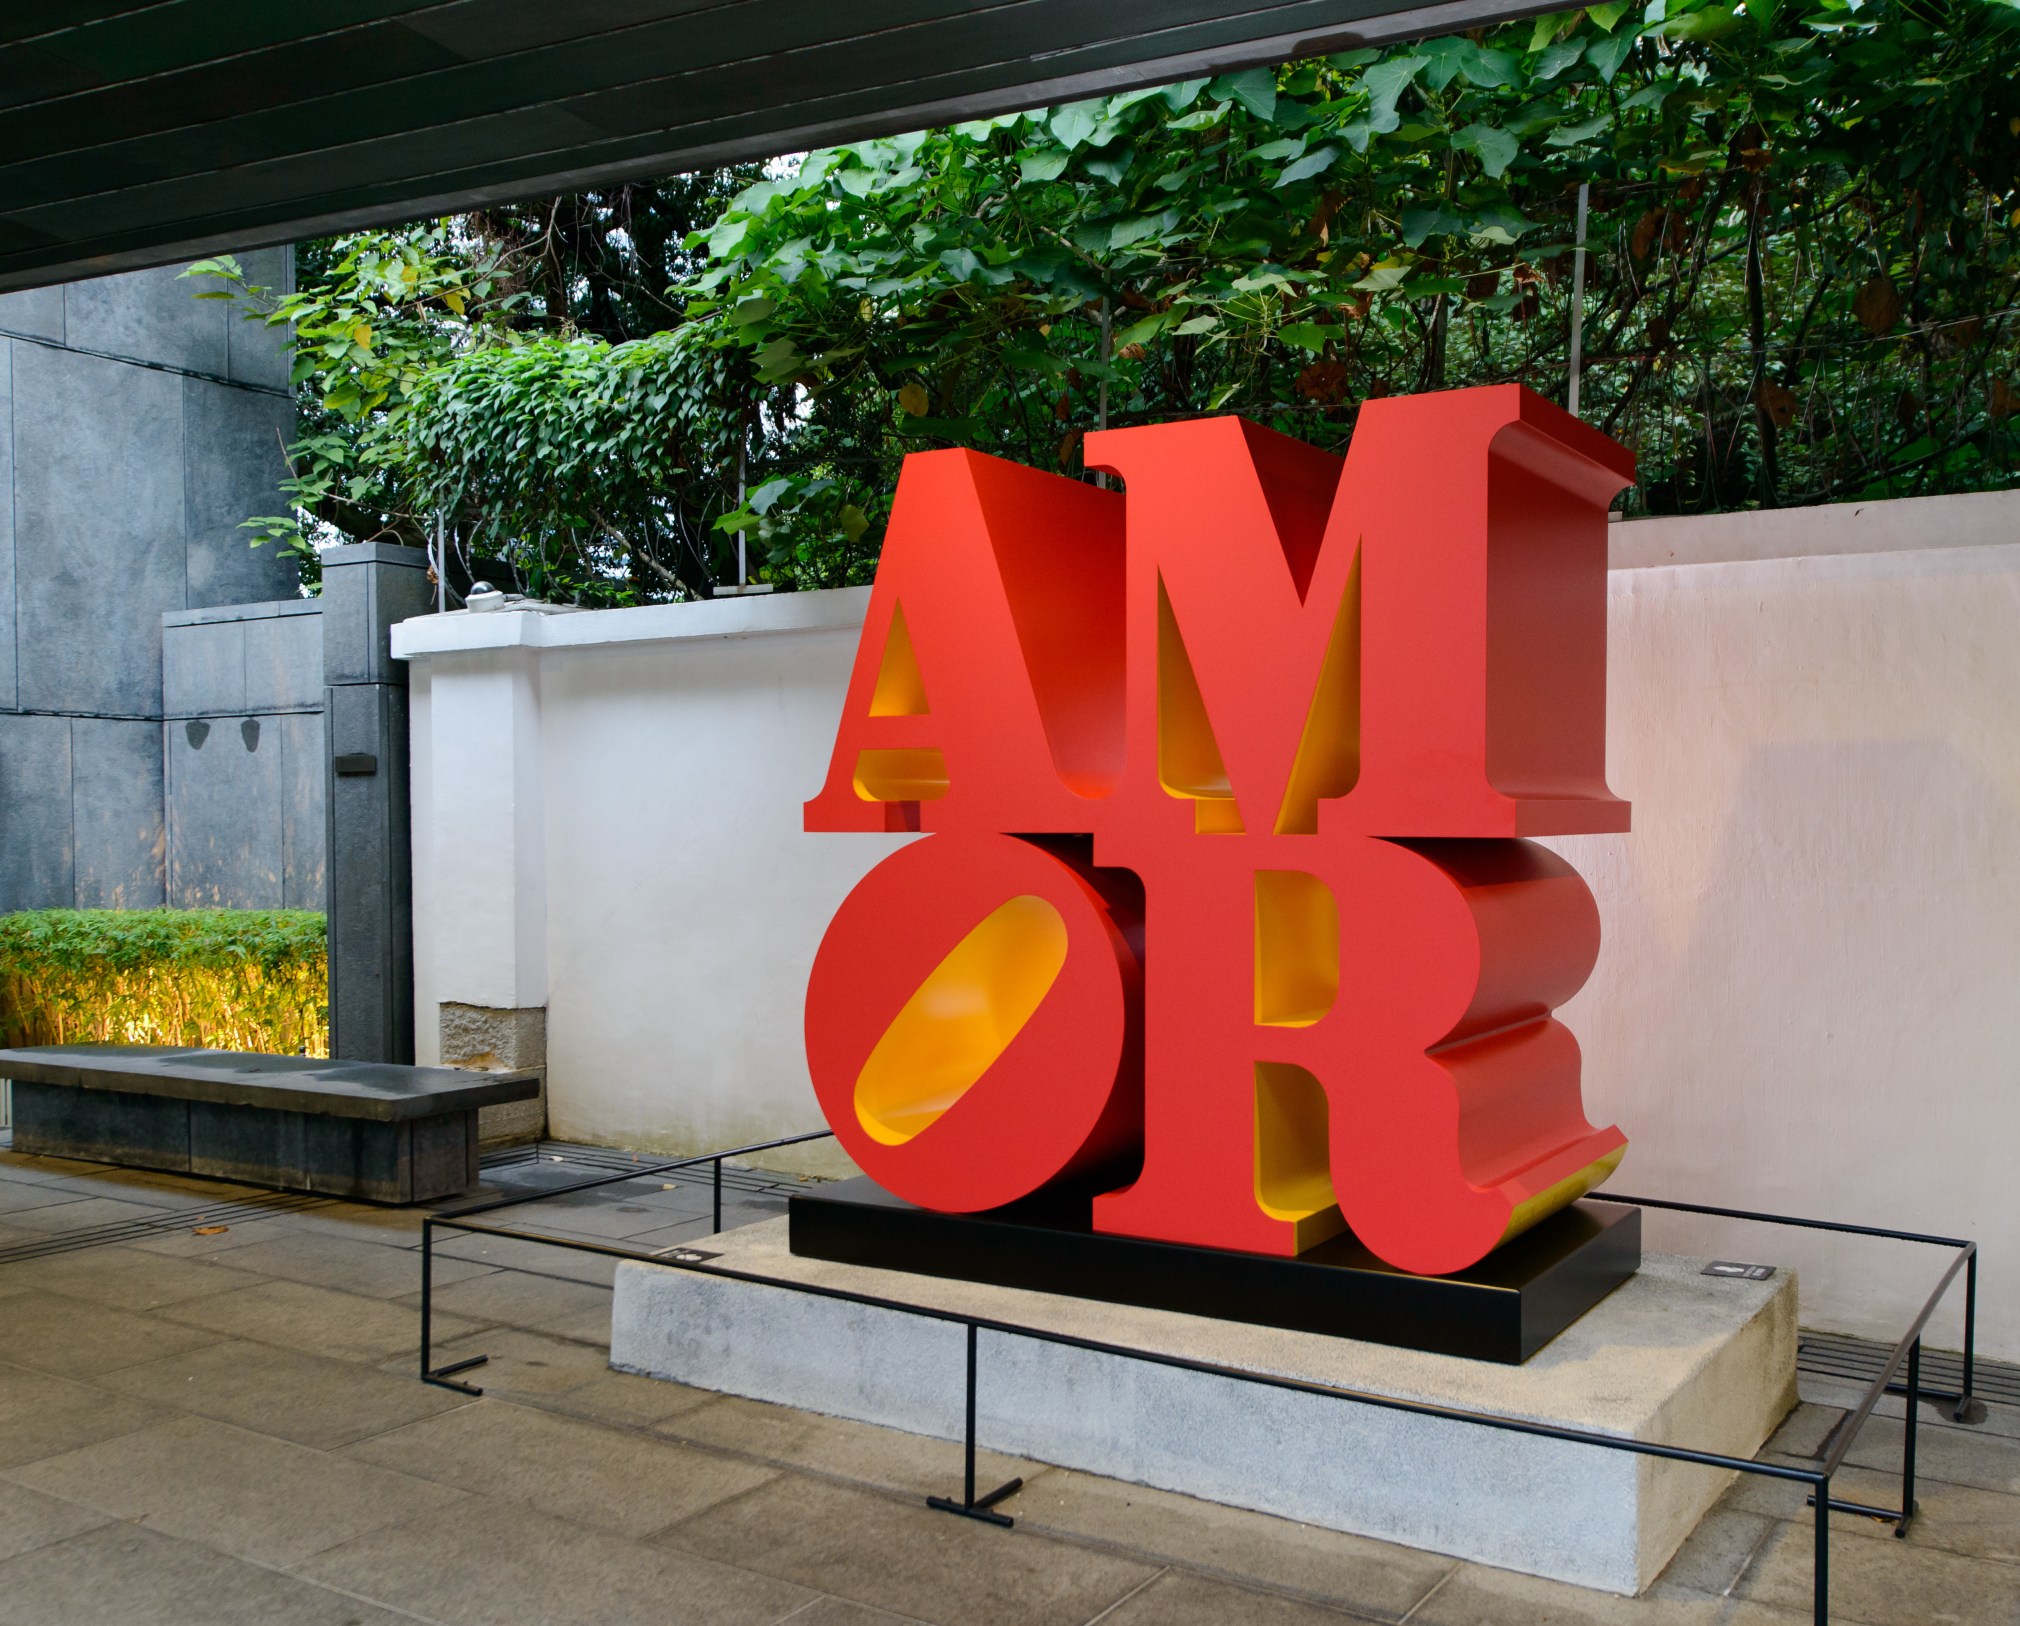 AMOR is a 72 by 72 by 36 inch polychrome aluminum sculpture consisting of the letters A and M atop a tilted O and R. The front, back and sides of the letters are red, and the insides are yellow.